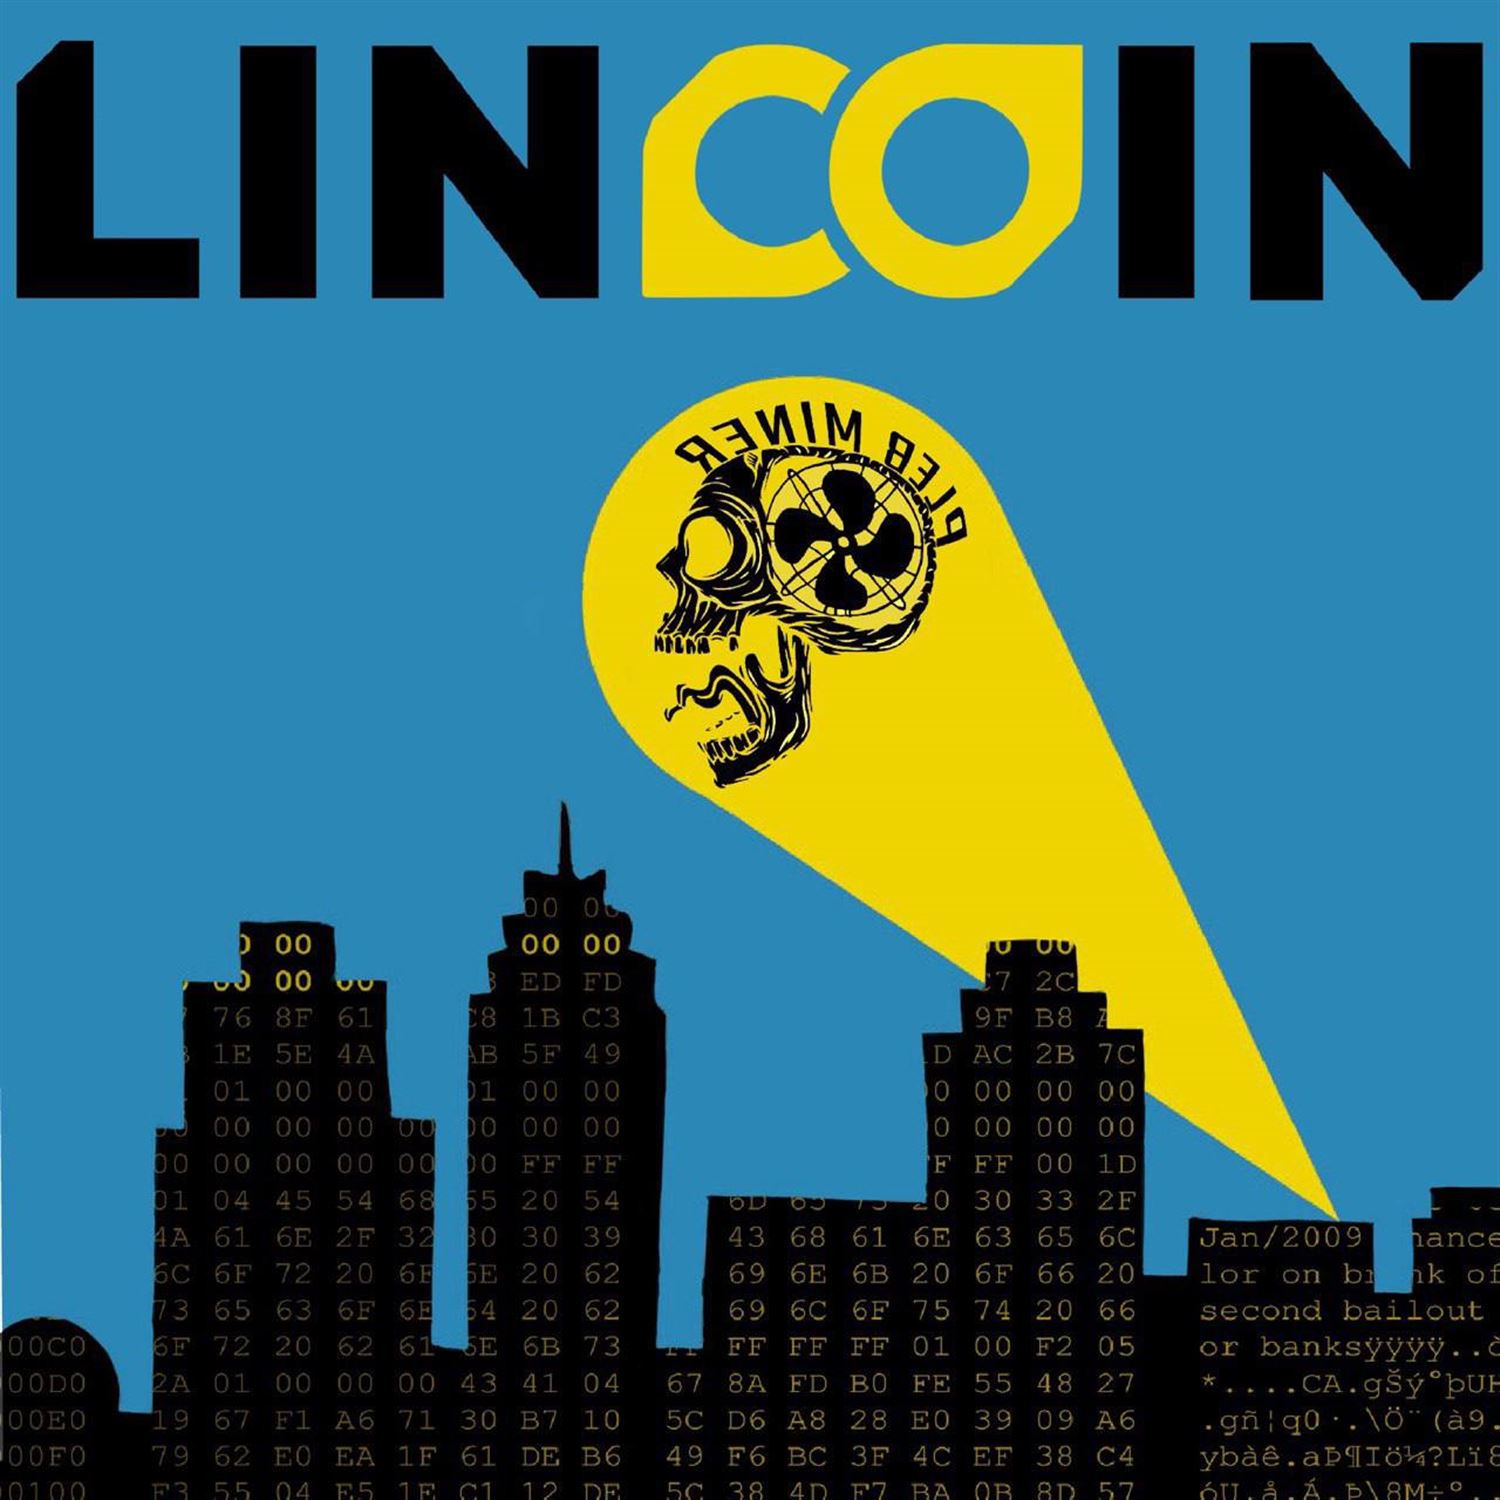 📊 Statistics Presented by Lincoin 📊